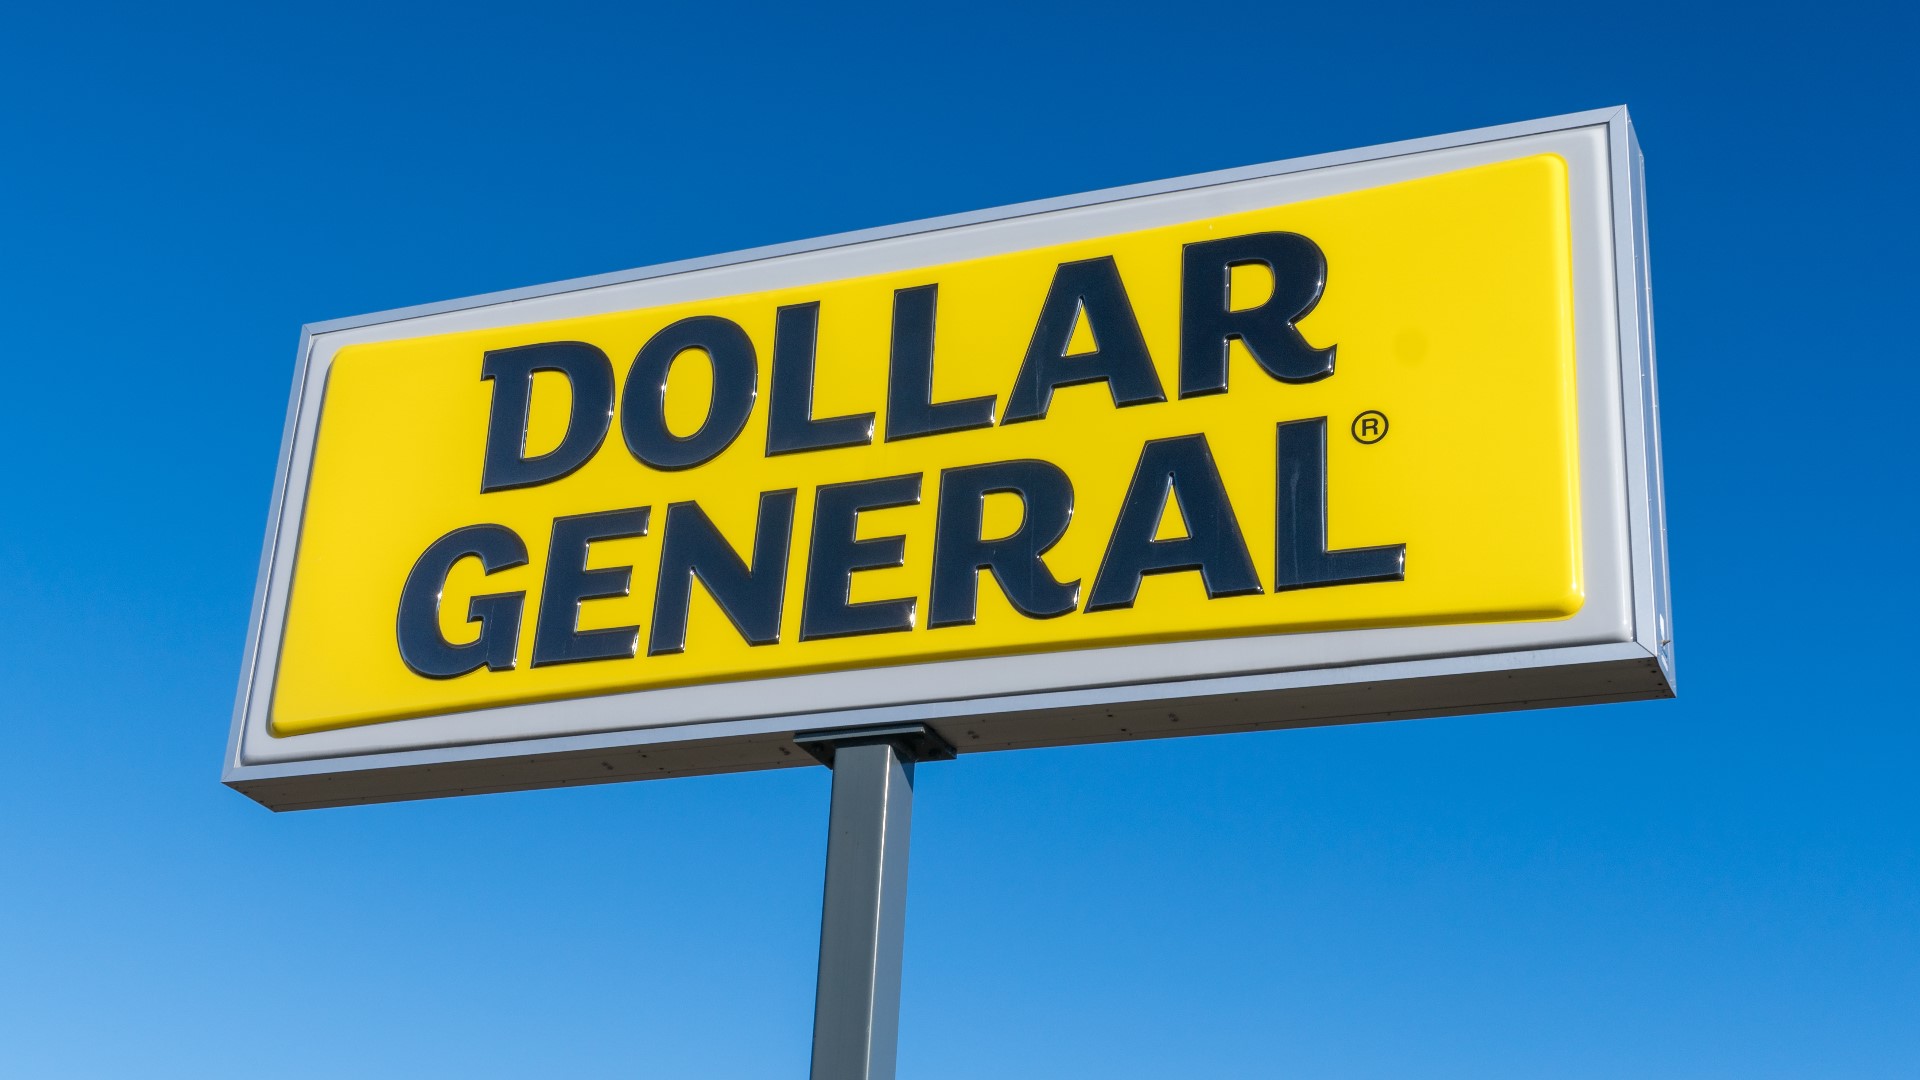 The failed inspection comes two weeks after Ohio Attorney General Dave Yost announced a lawsuit against Dollar General.